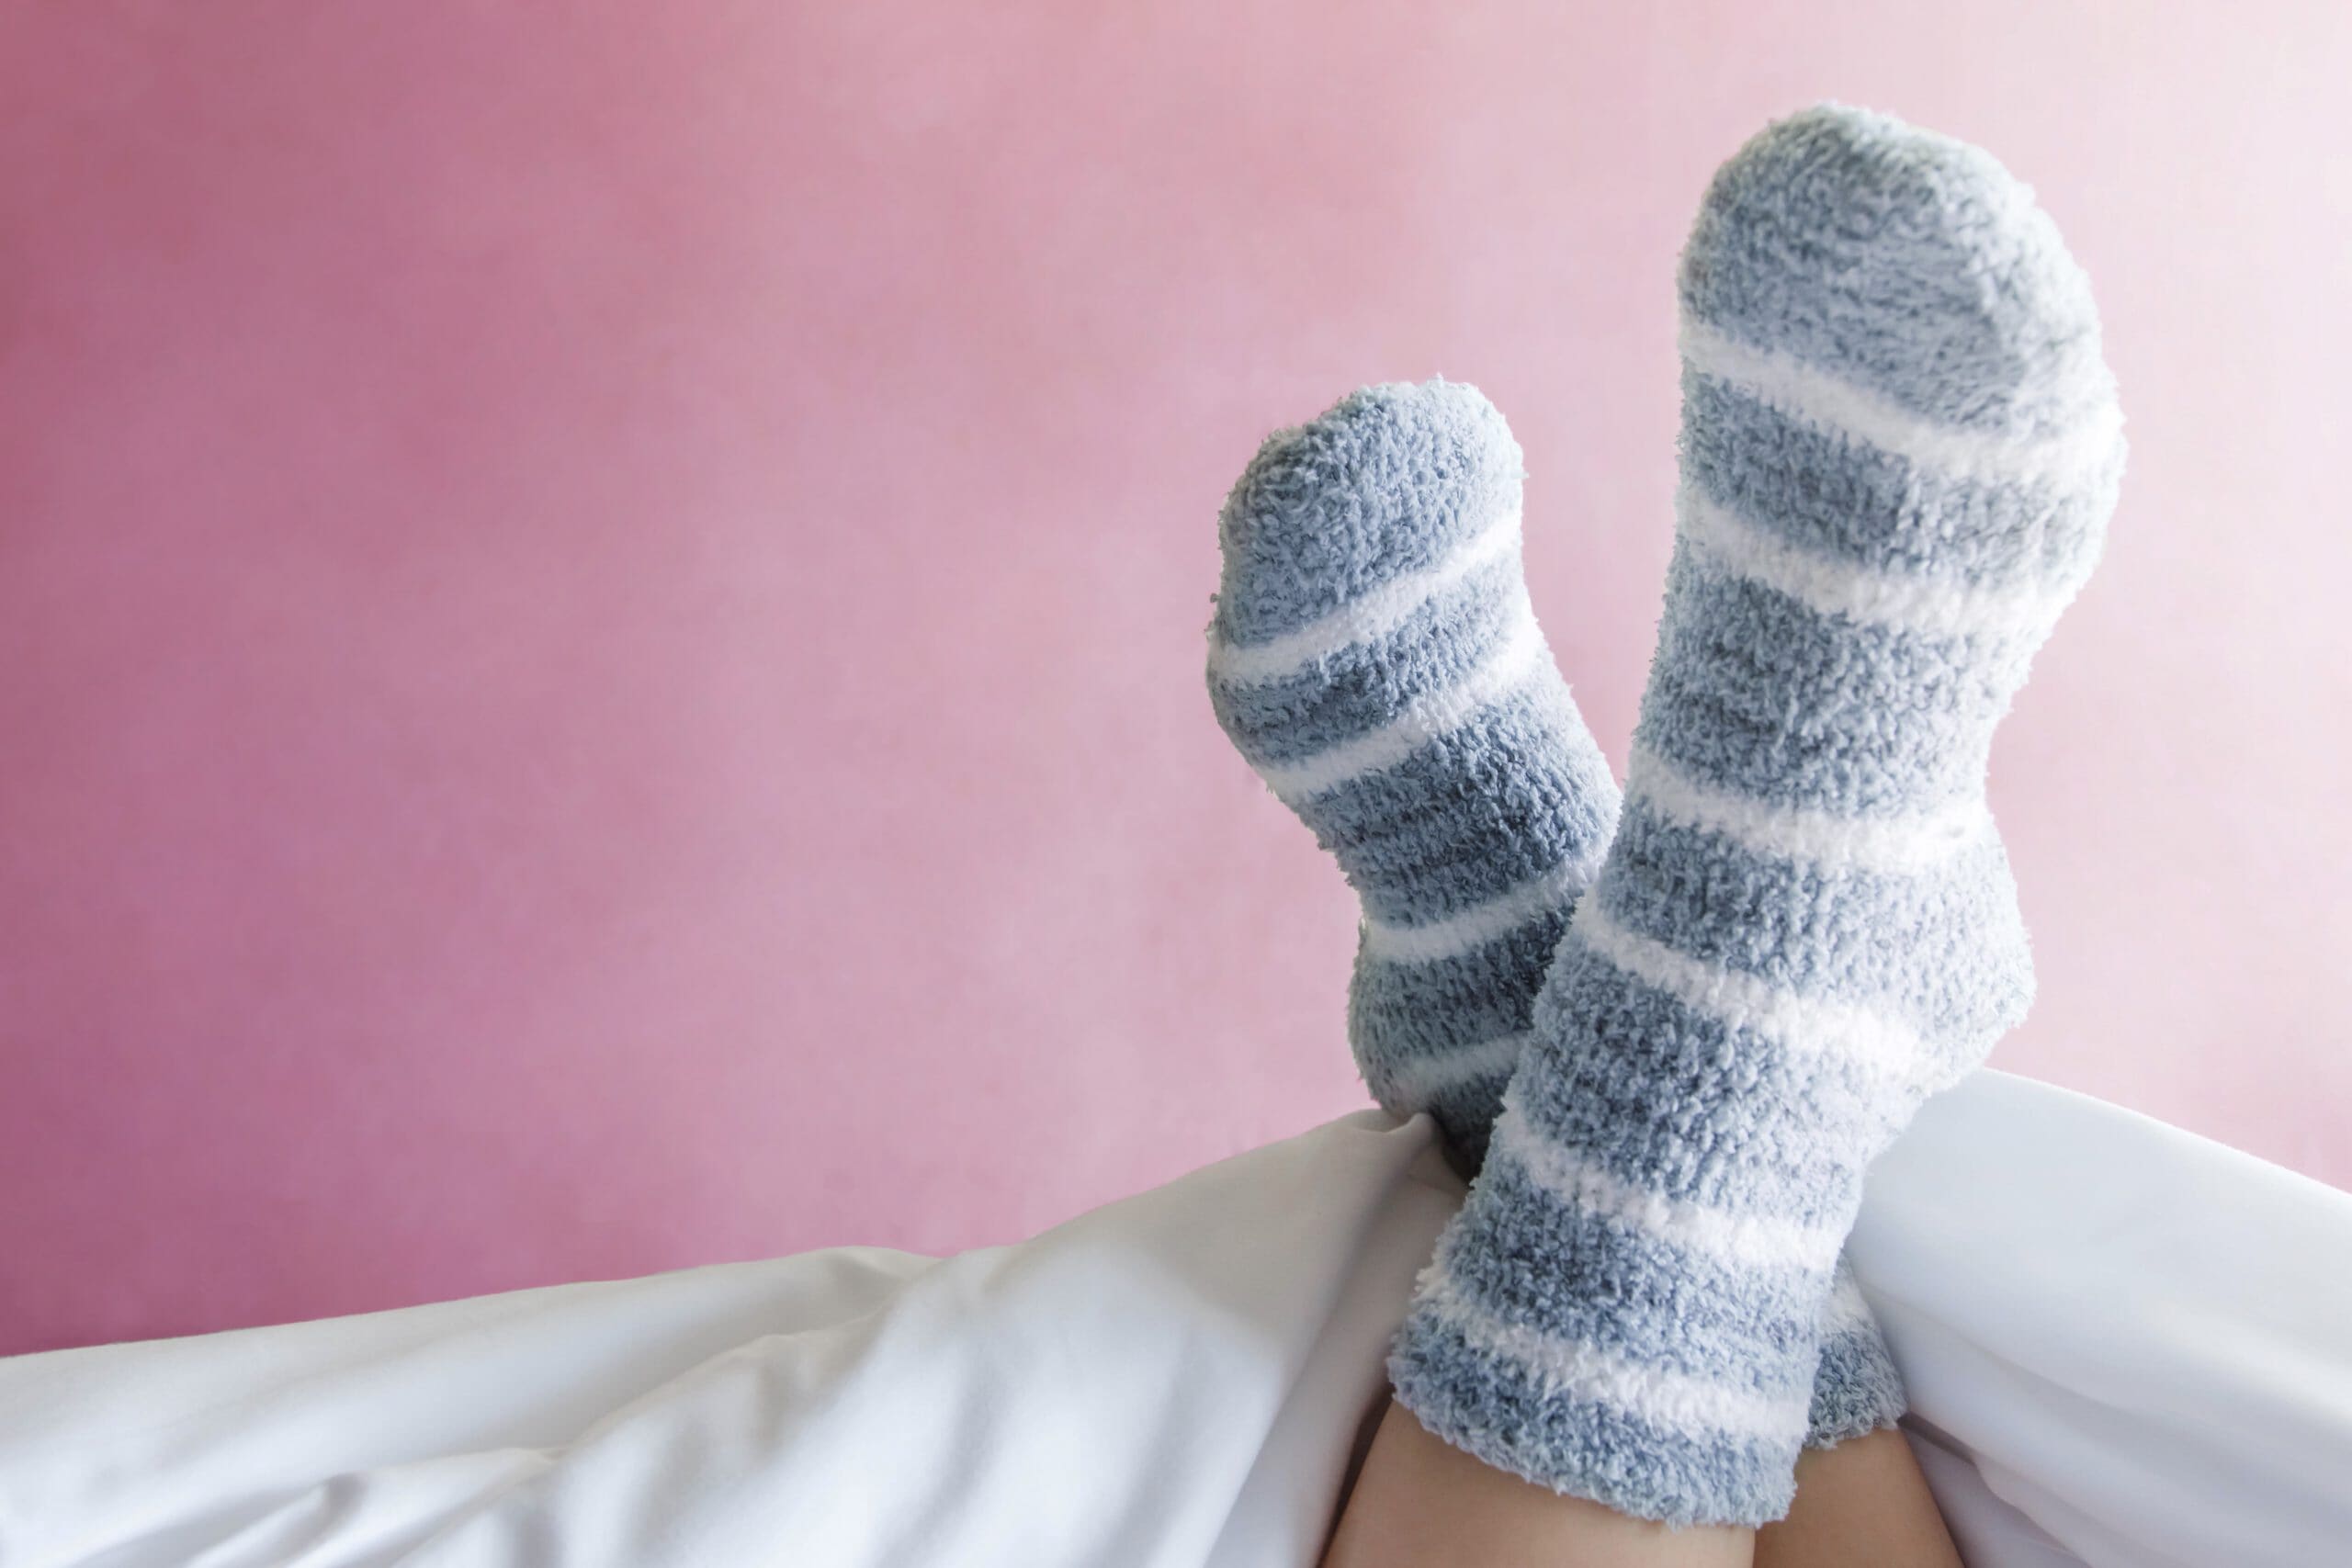 Should I Wear Socks to Bed With Athlete's Foot